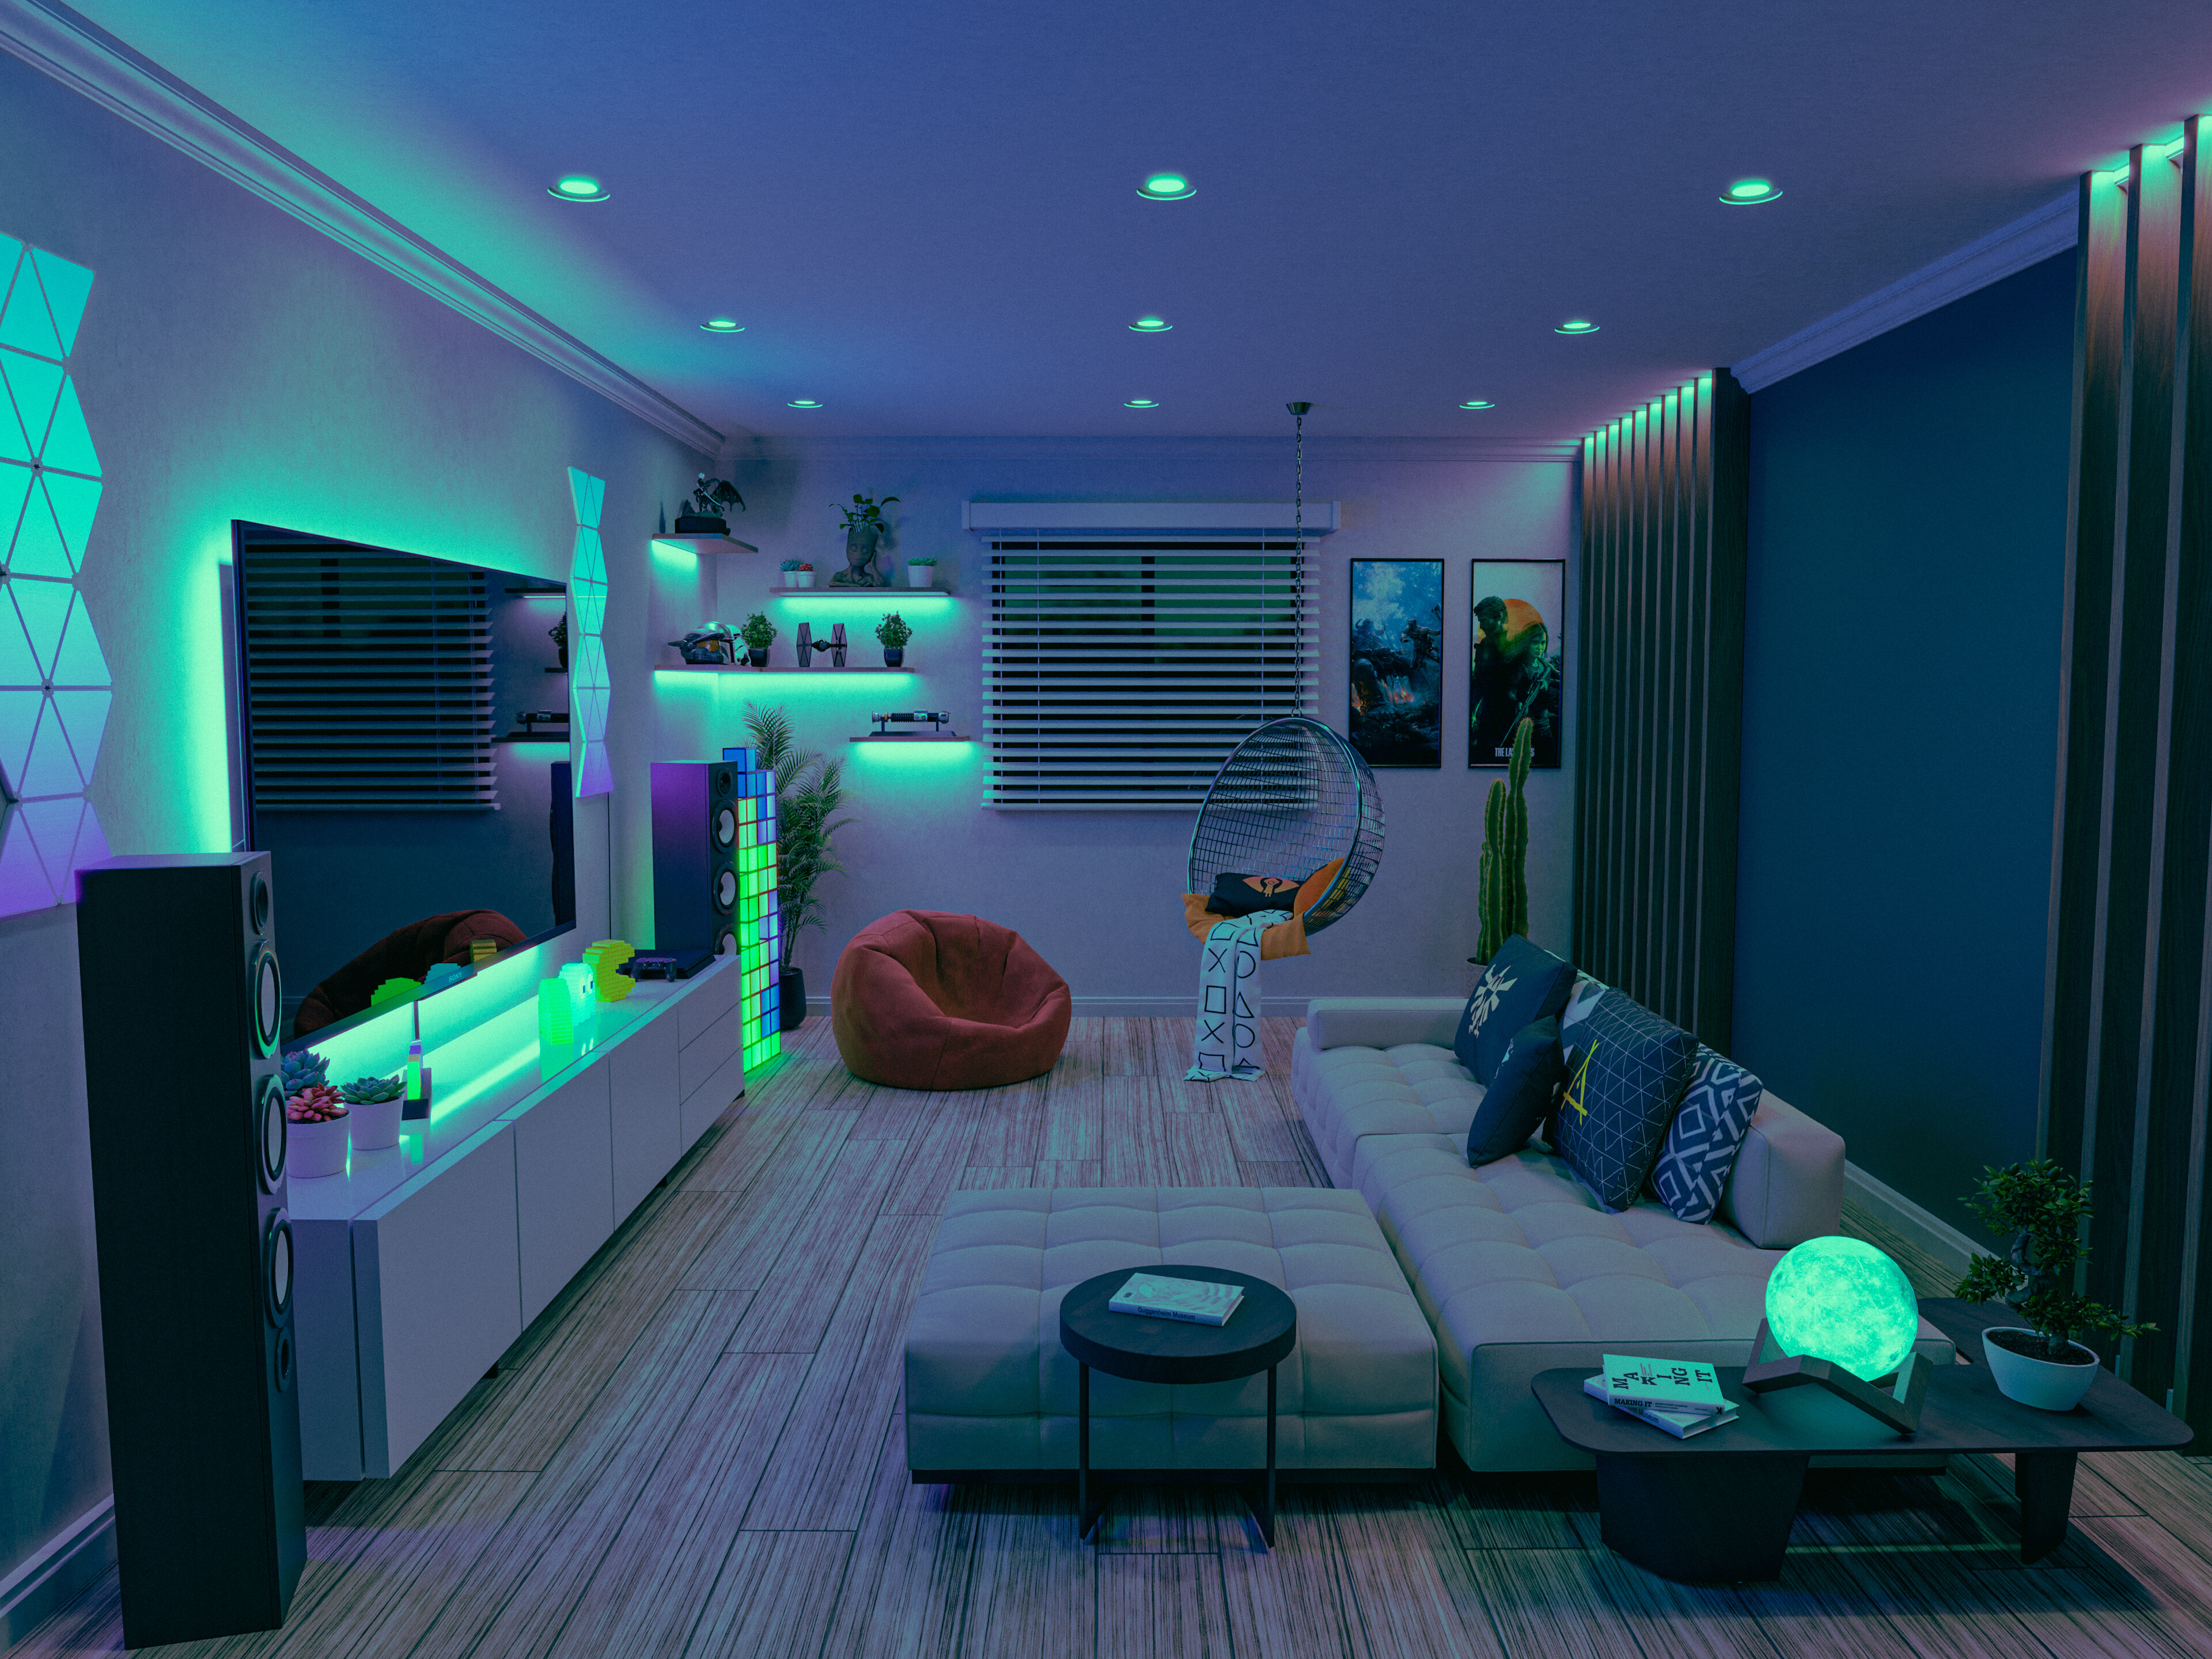 Gaming Room Visualization - Finished Projects - Blender Artists Community